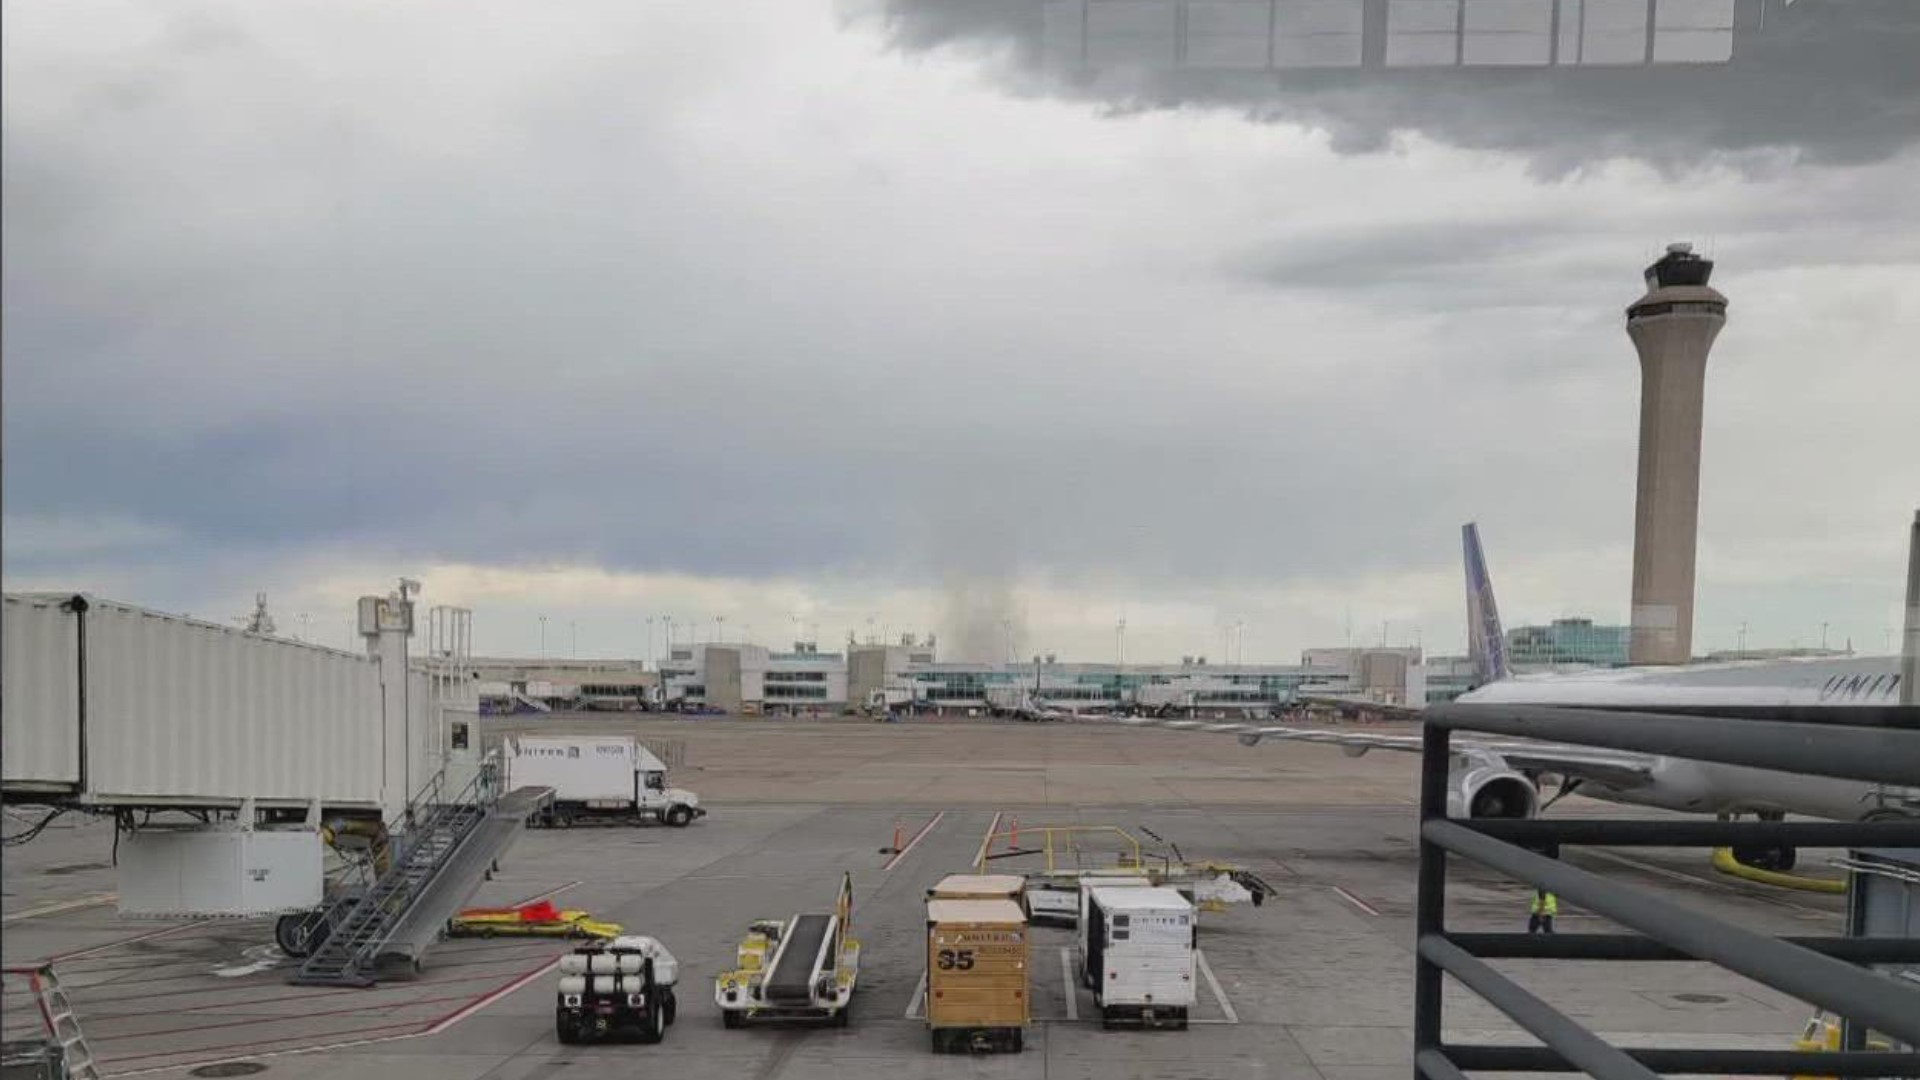 The National Weather Service said a confirmed landspout tornado was spotted just north of the airport around 2:20 p.m.